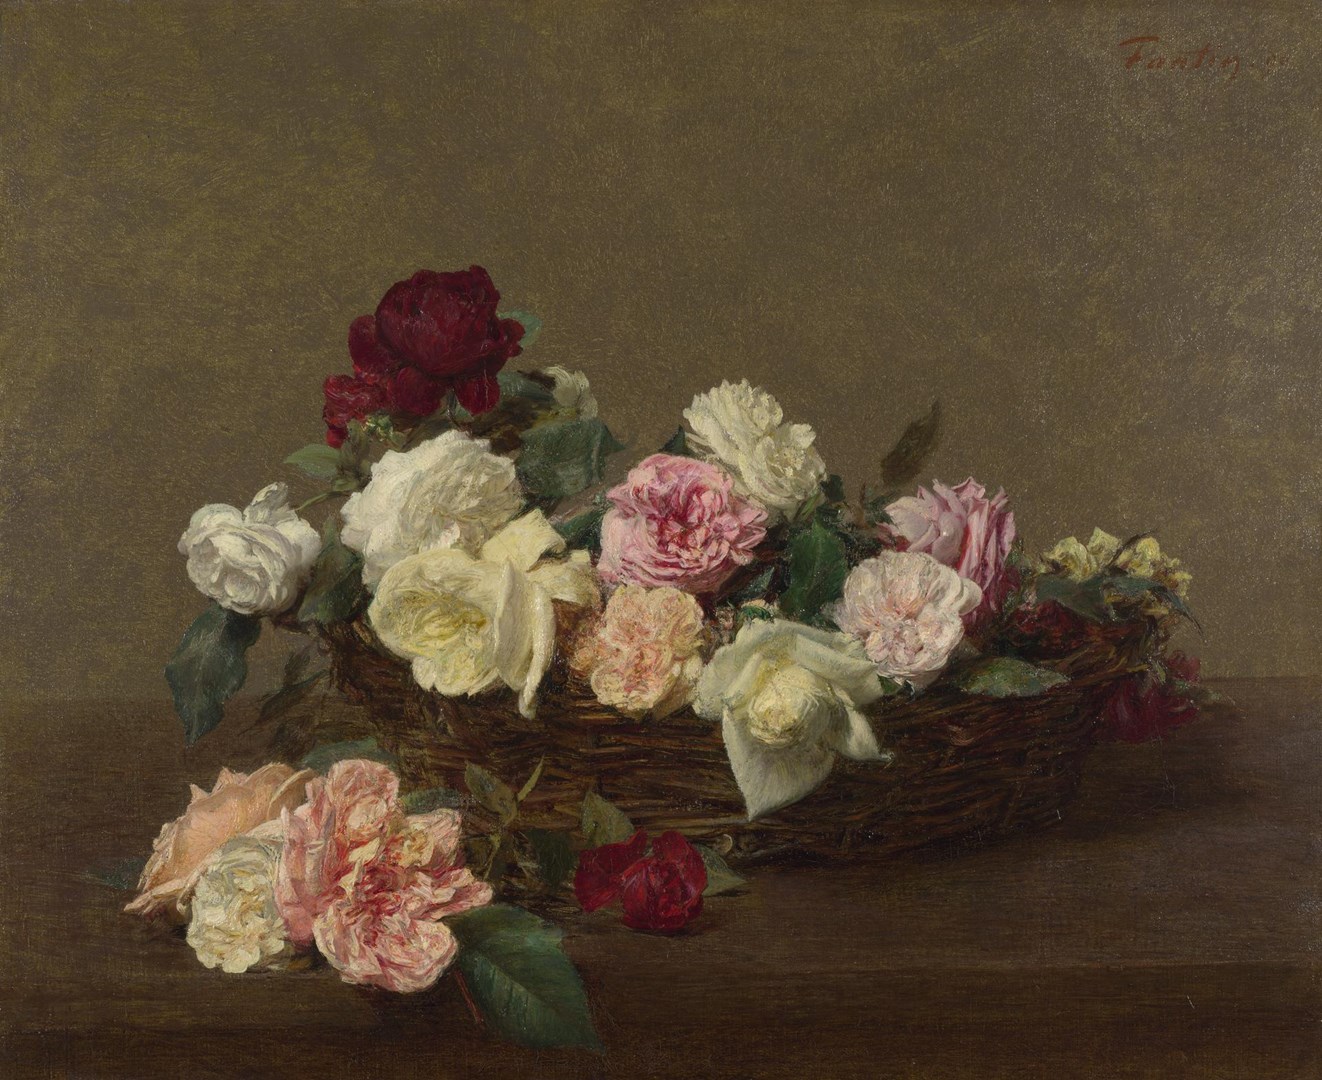 A Basket of Roses by Henri Fantin-Latour - 1890 - 48.9 x 60.3 cm National Gallery